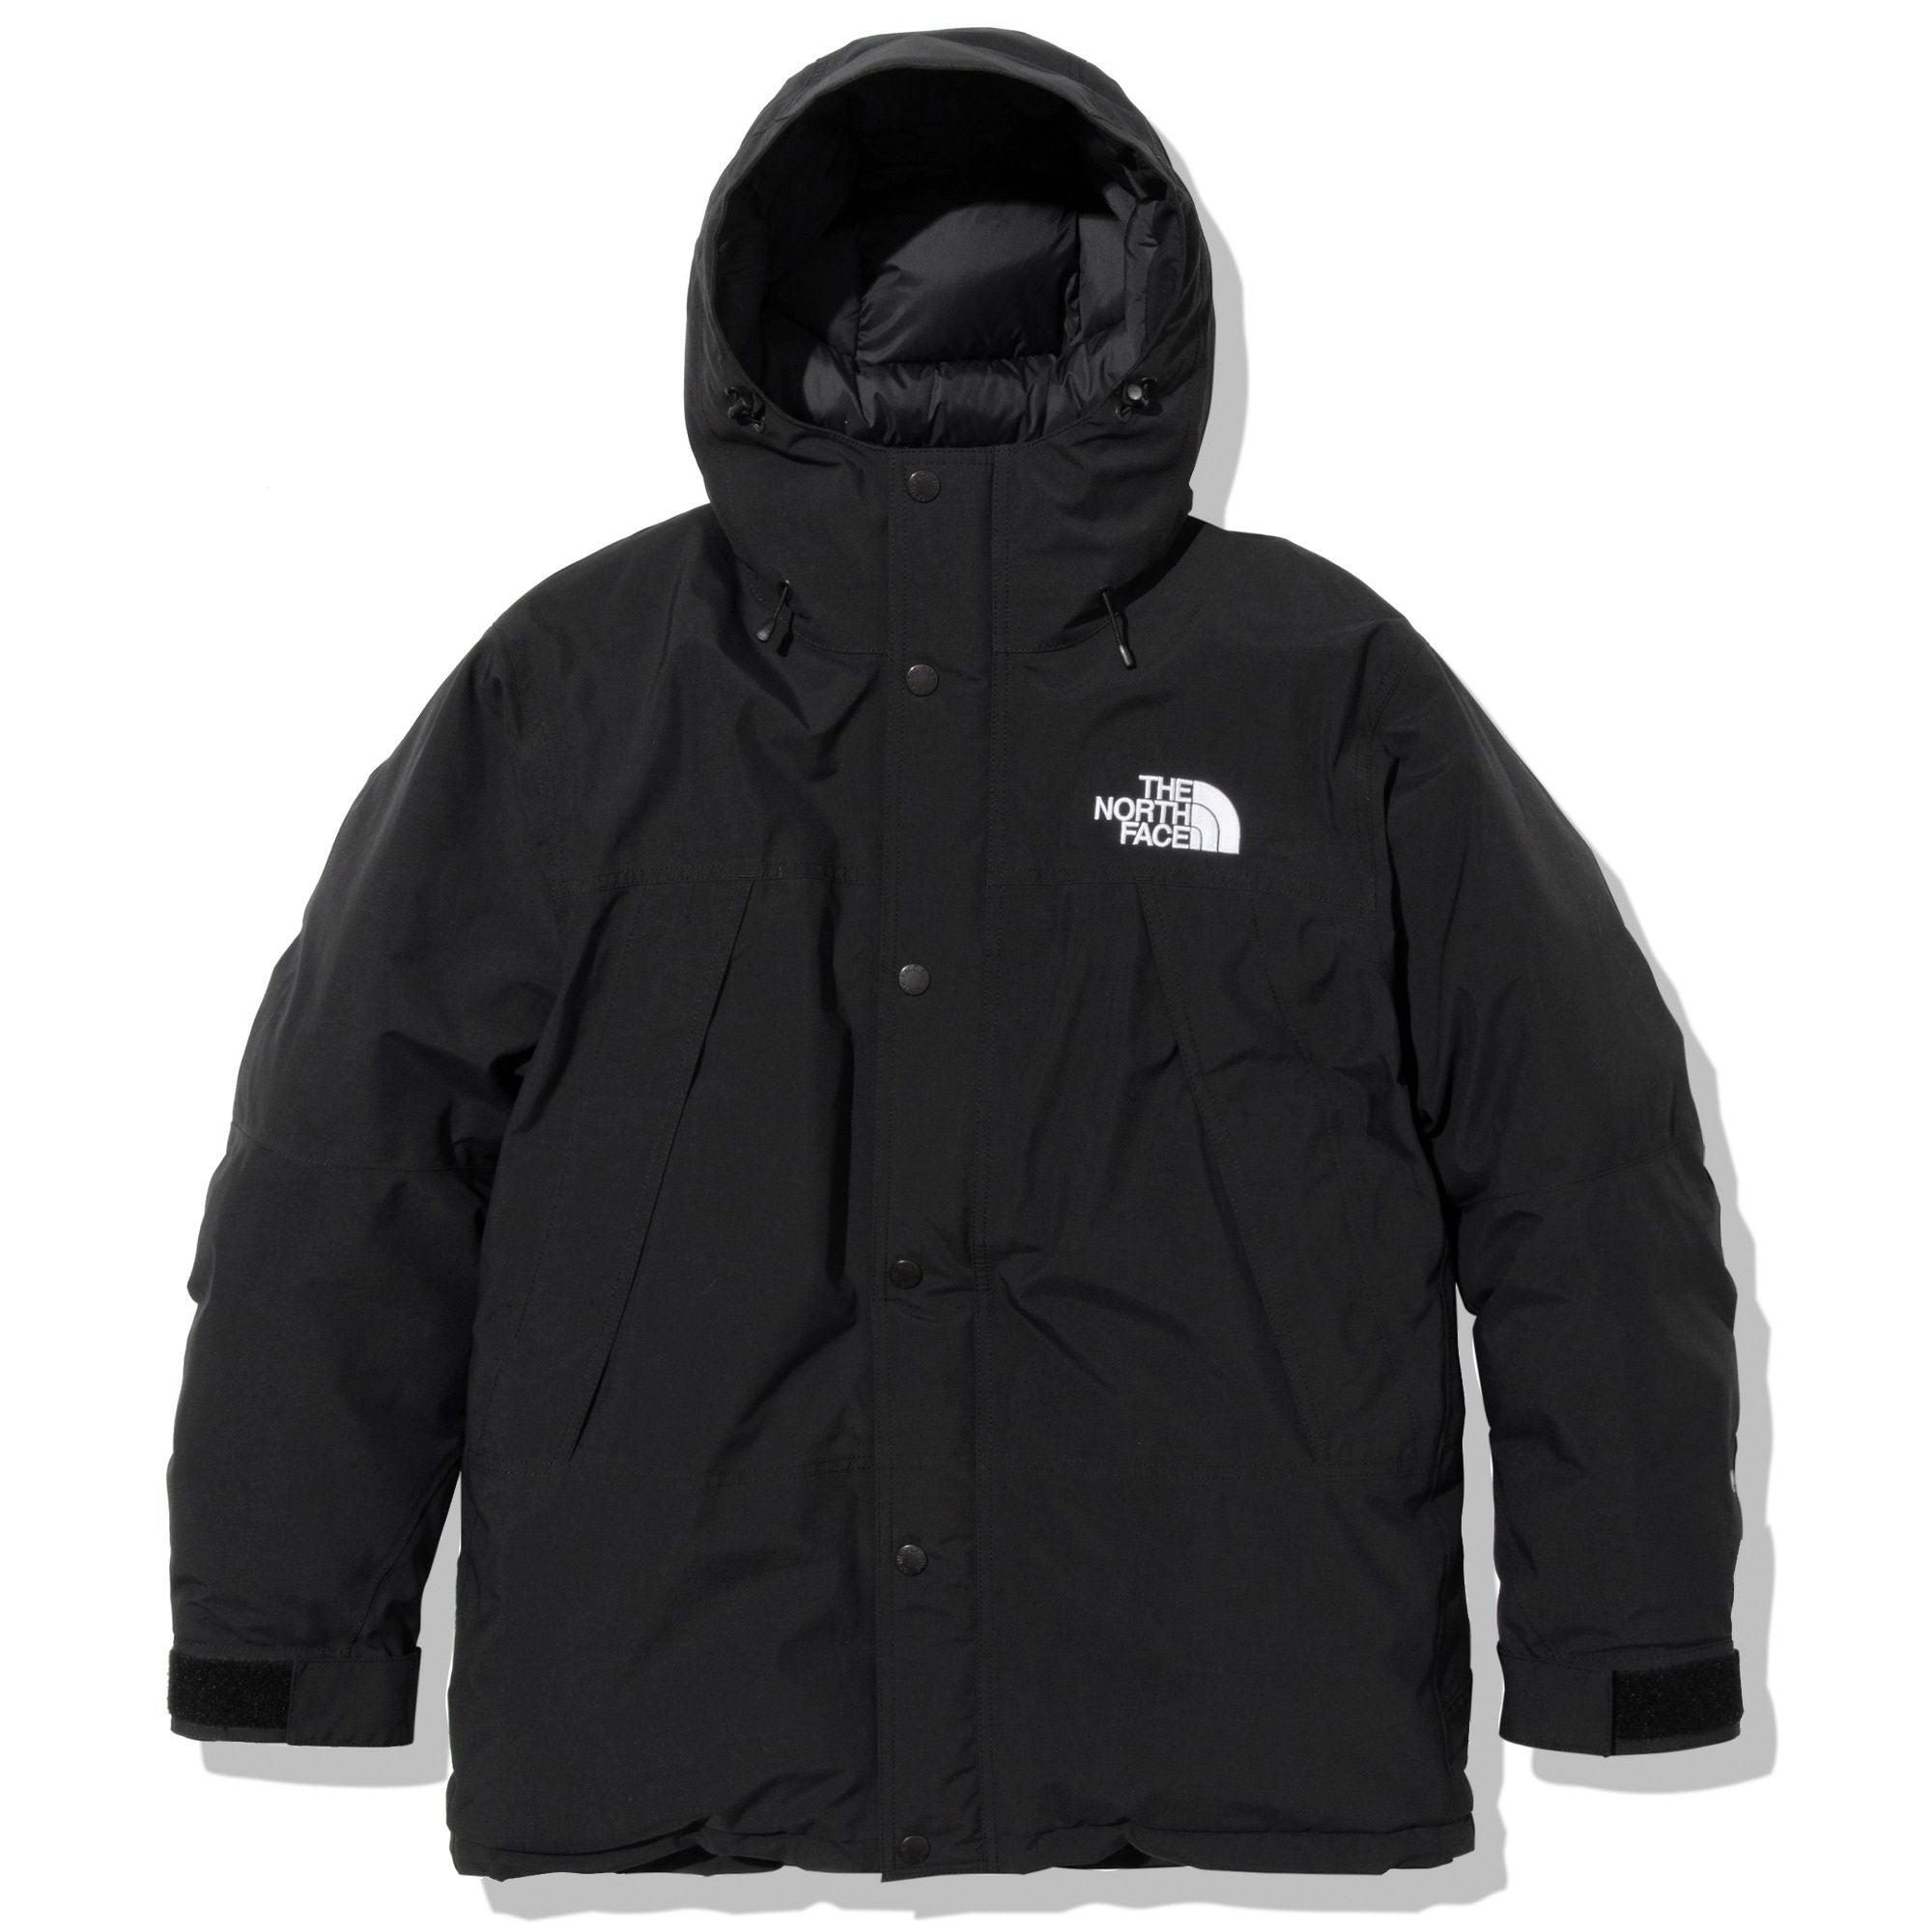 THE NORTH FACE / Mountain Down Jacket ND92237 – 小黑痣服飾顧問工作室